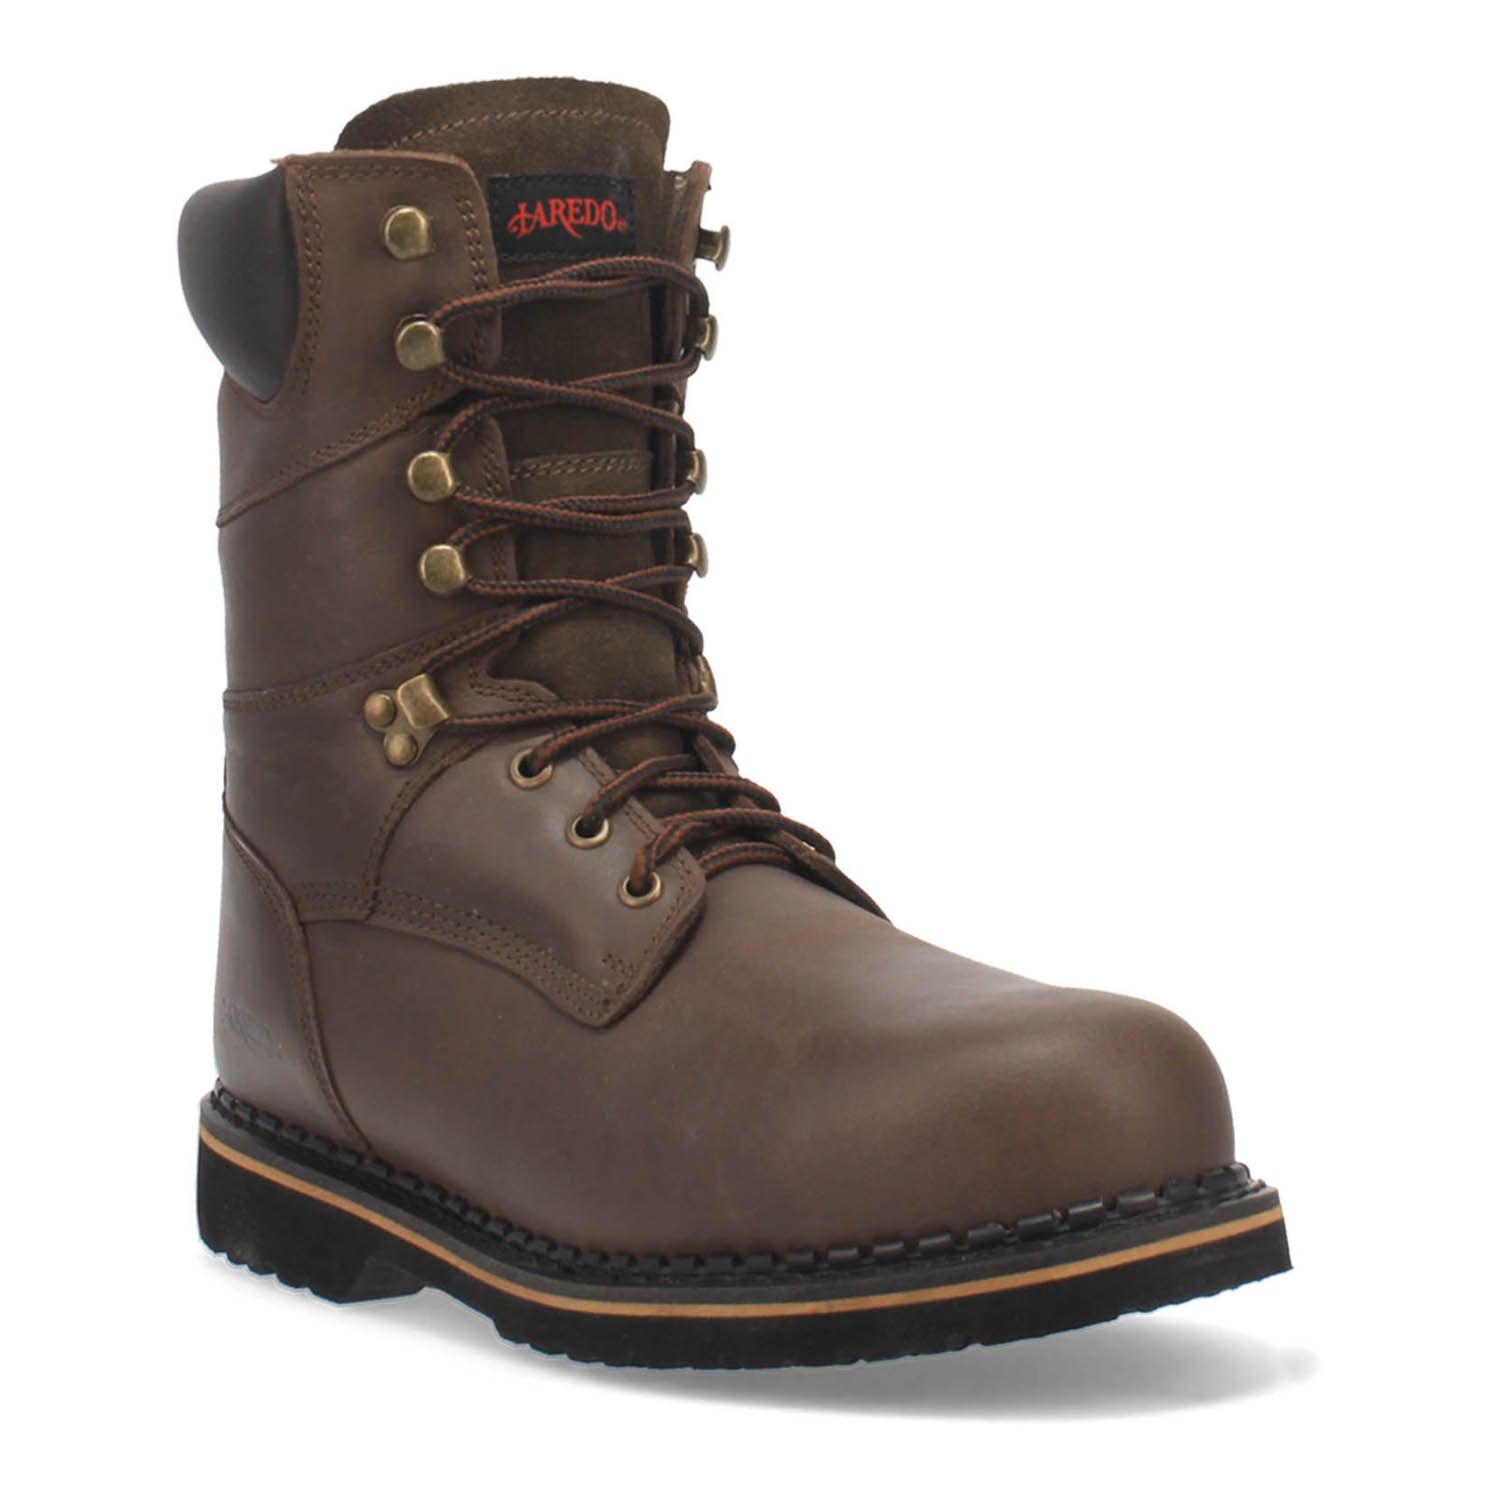 Image for Laredo Chain Men's Steel-Toe Leather Work Boots at Kohl's.